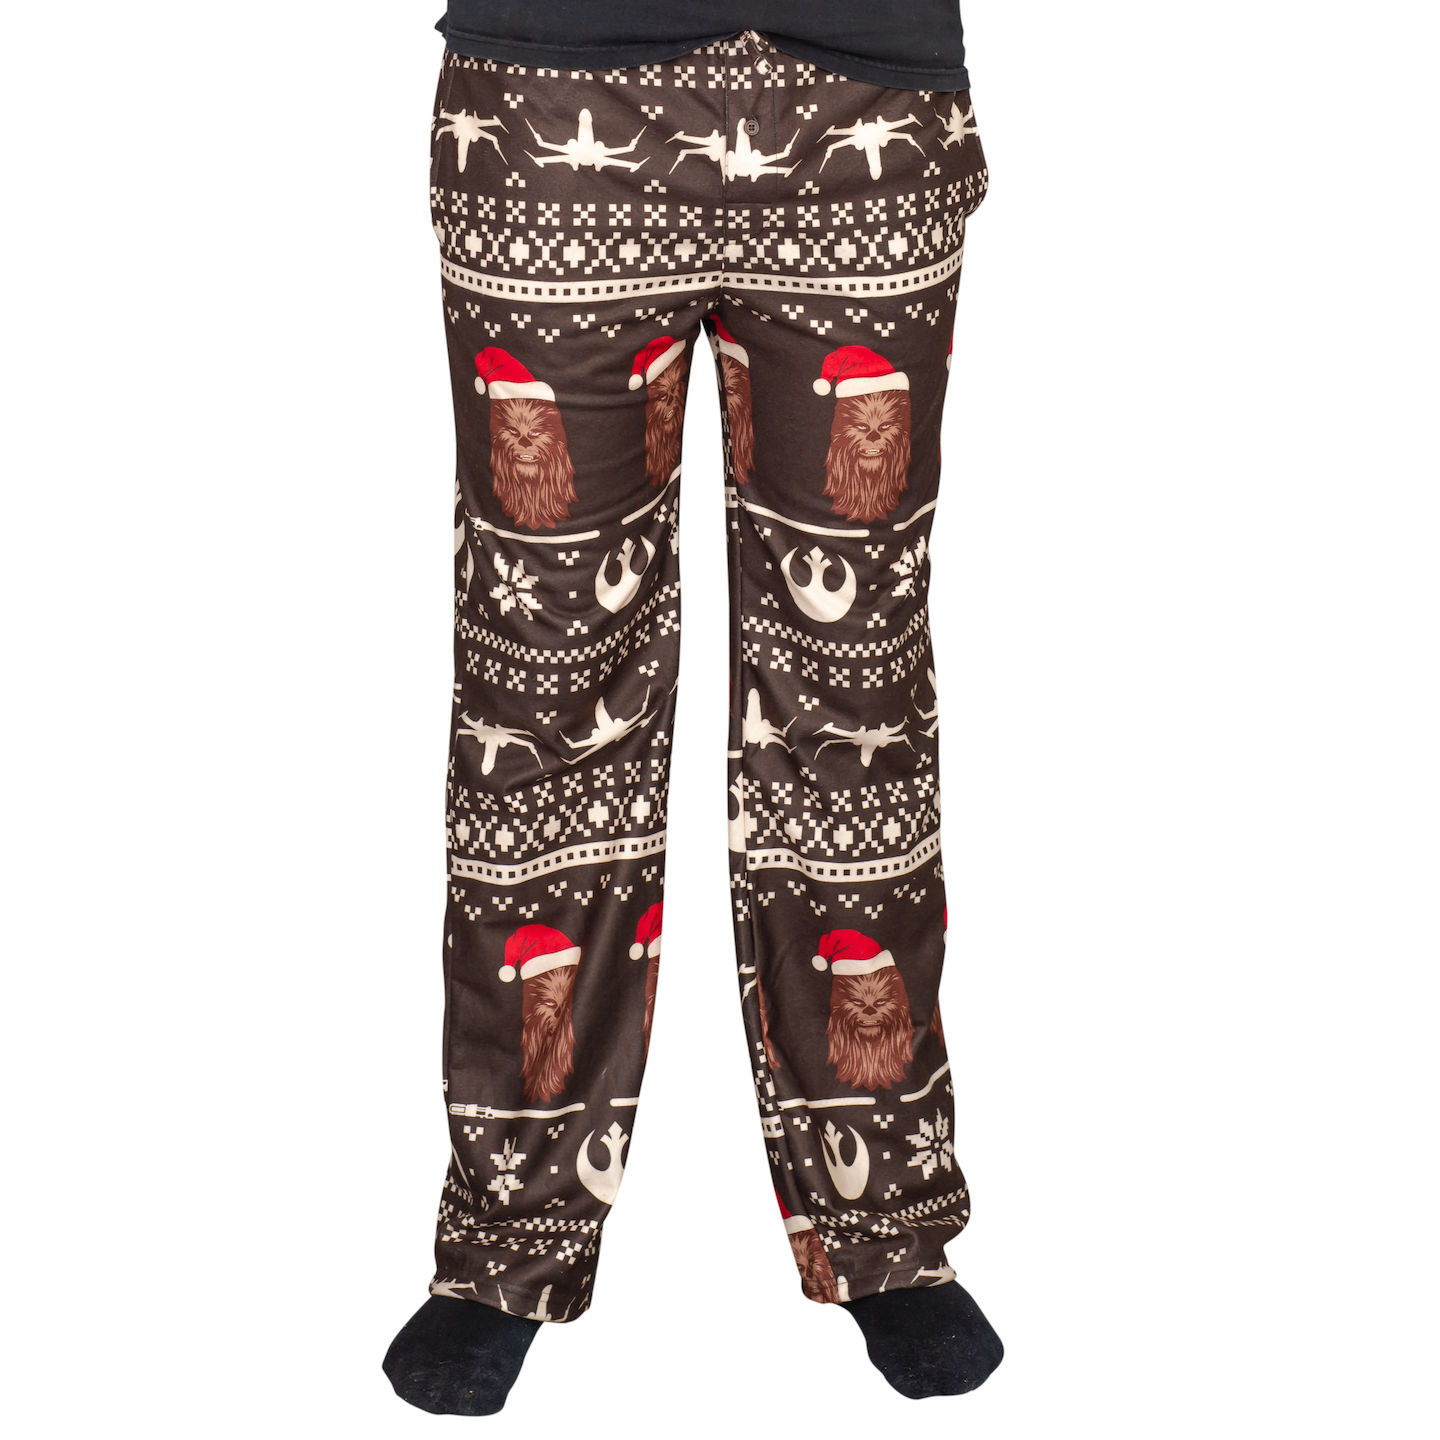 Star Wars Chewbacca Ships Christmas Lounge Pants,New Products : uglyschristmassweater.com